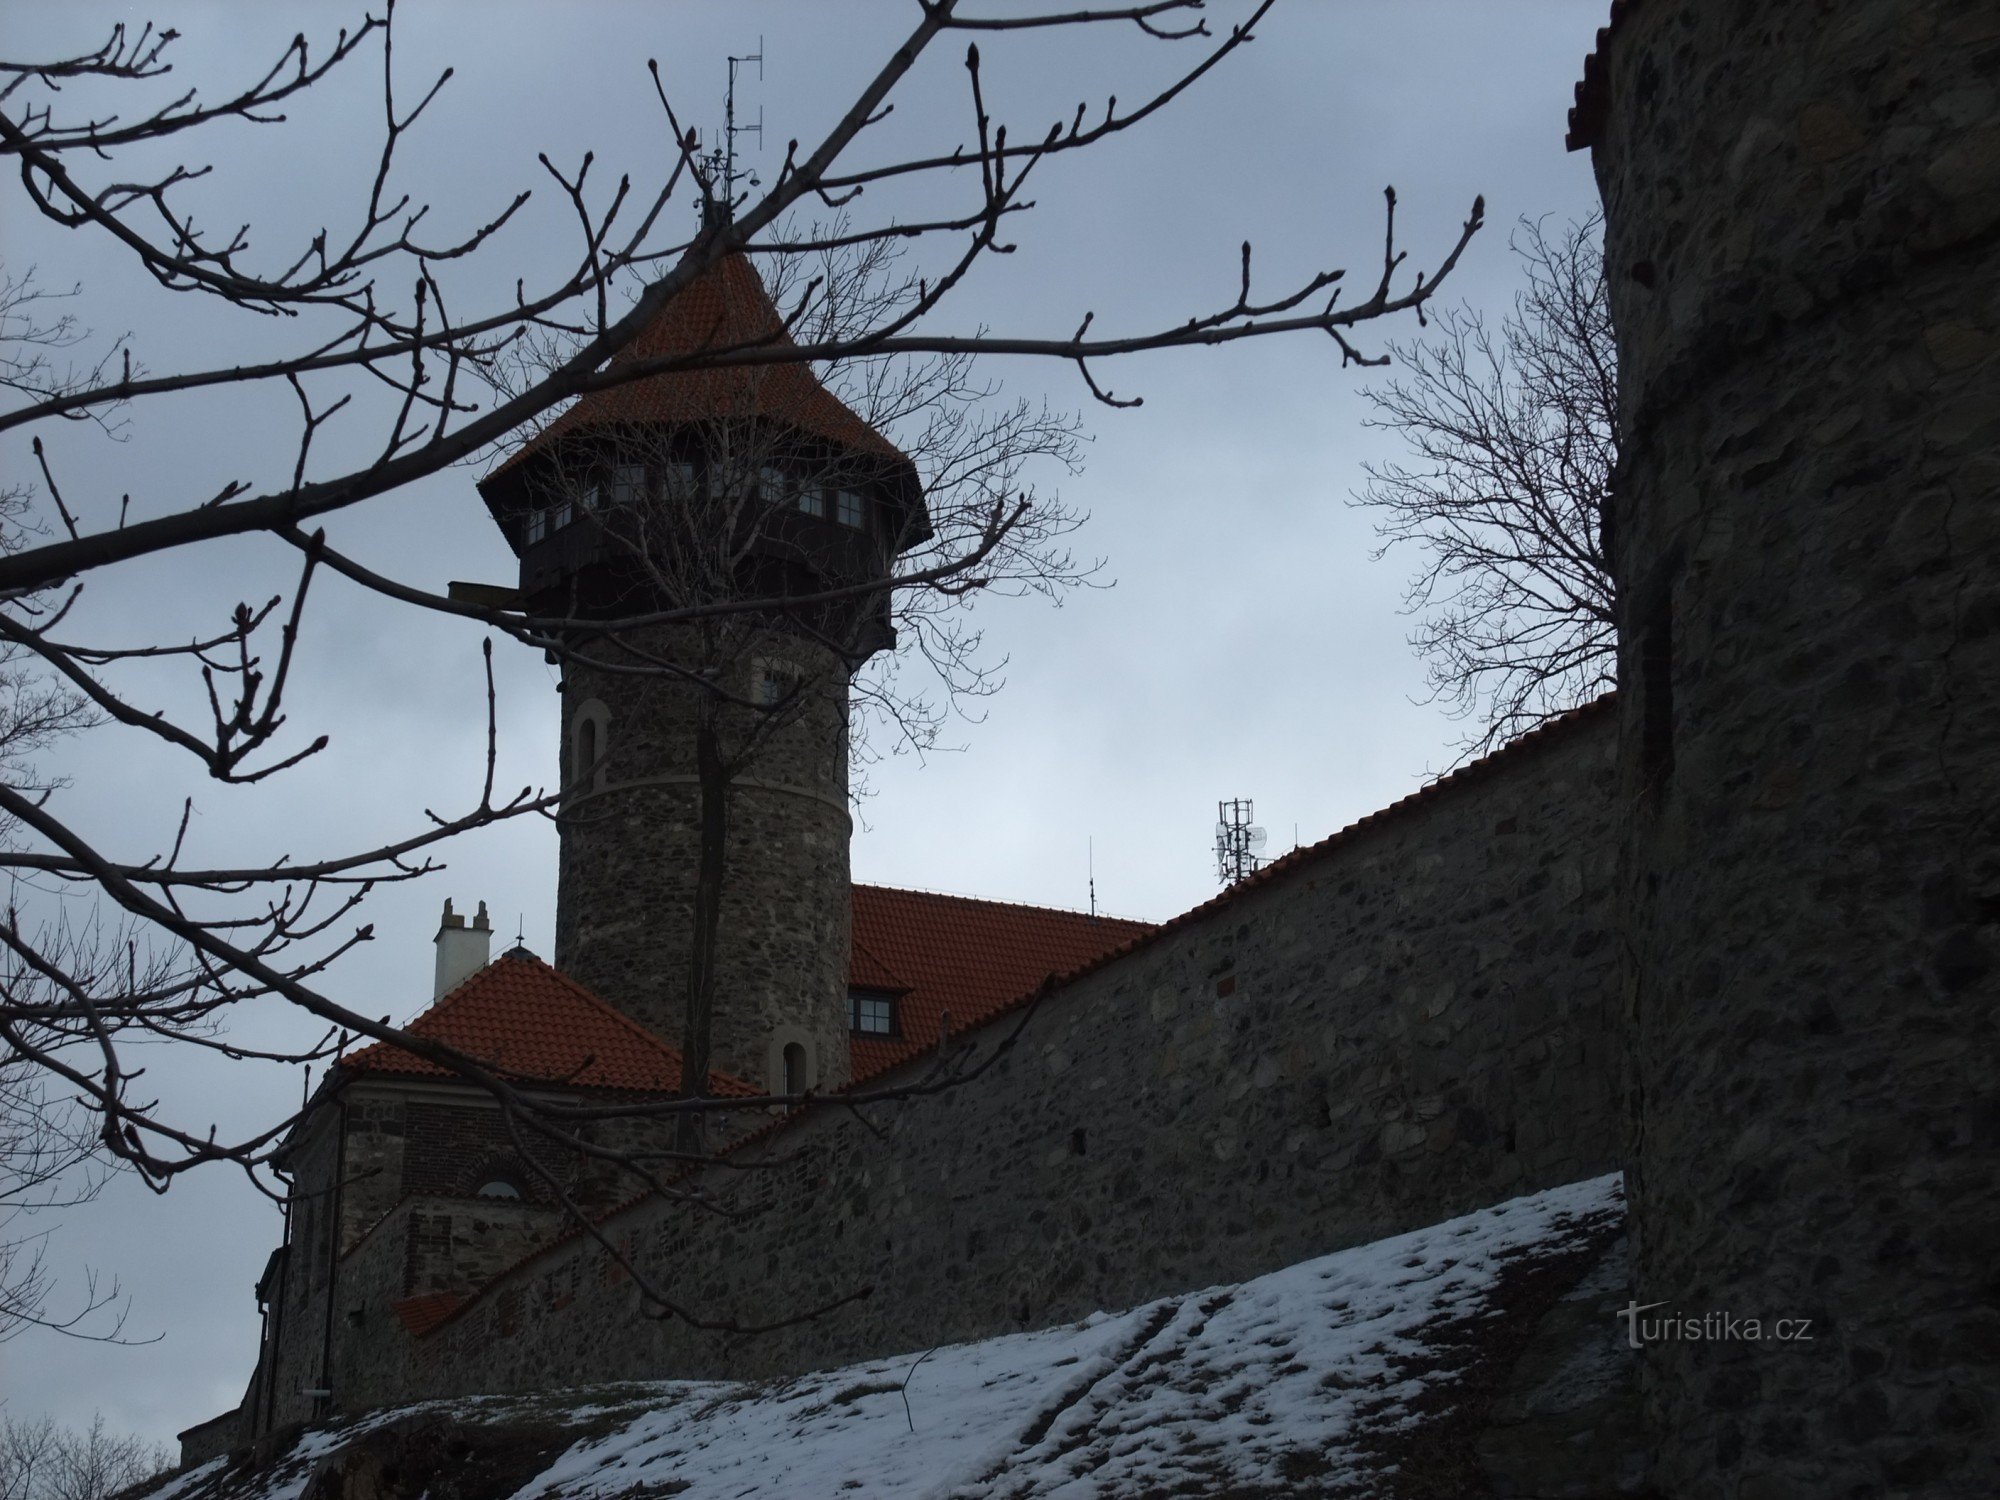 The city of Most in the palm of your hand – Hněvín Castle